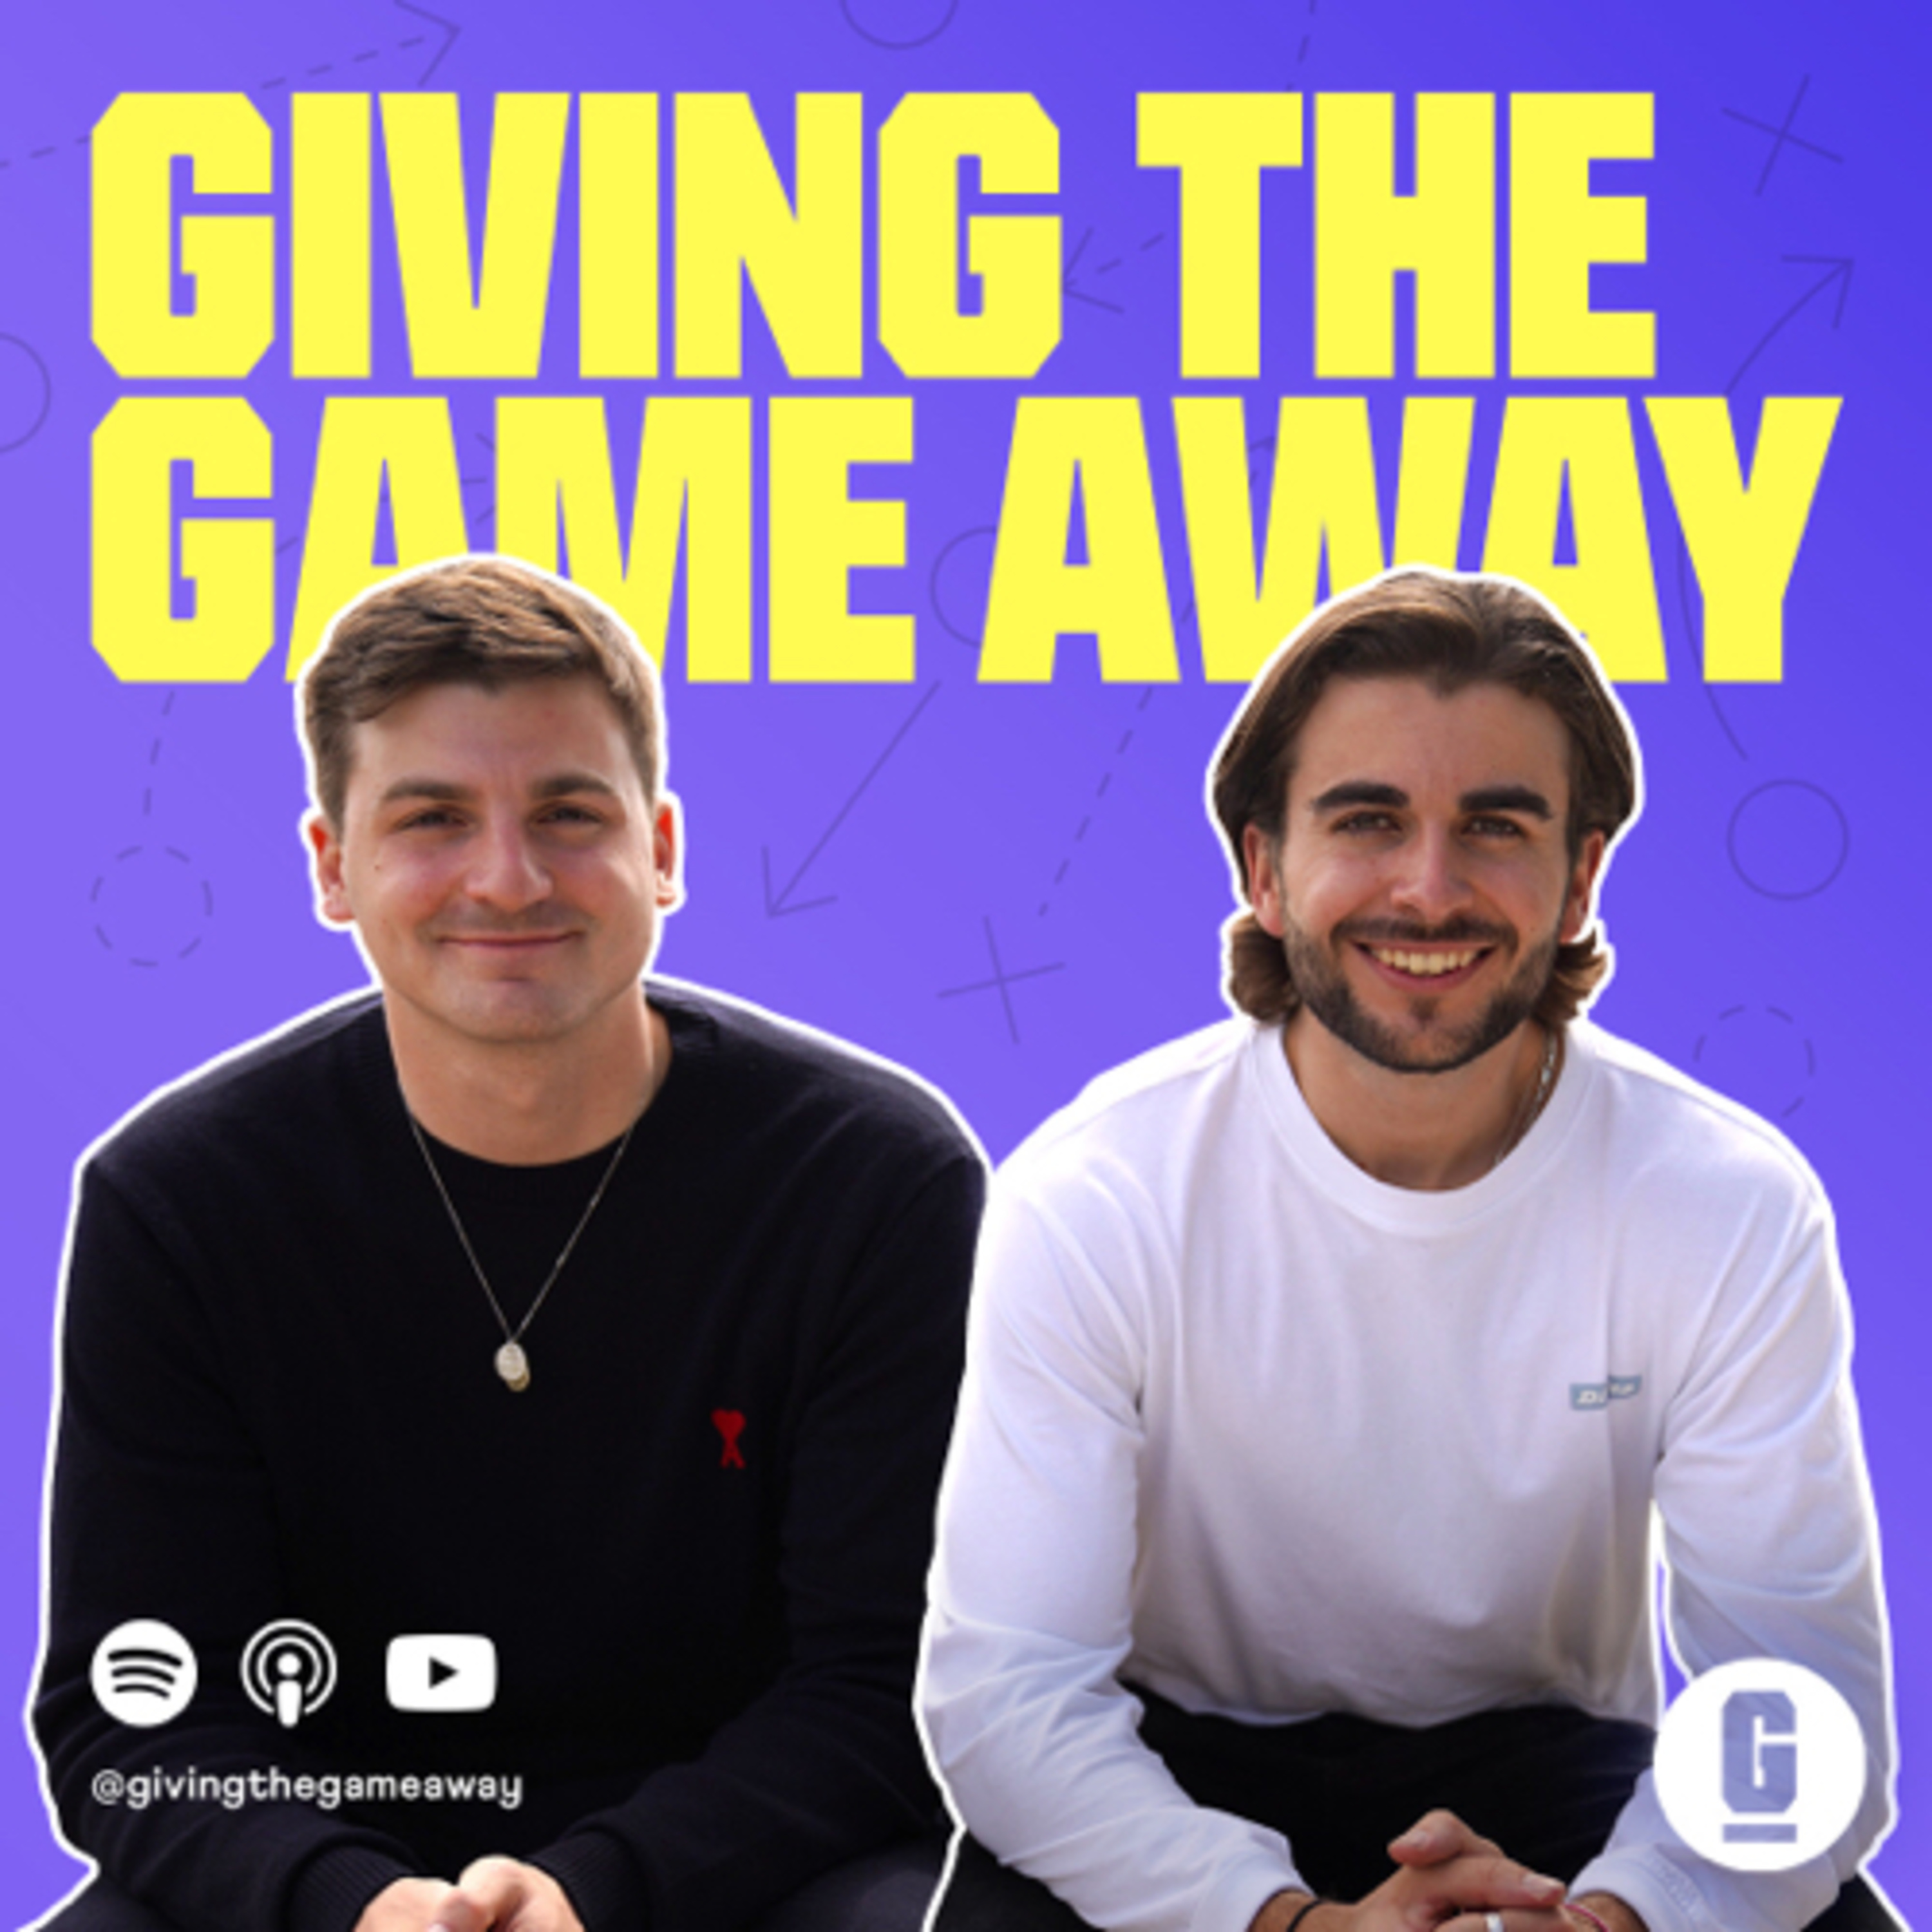 GIVING THE GAME AWAY image